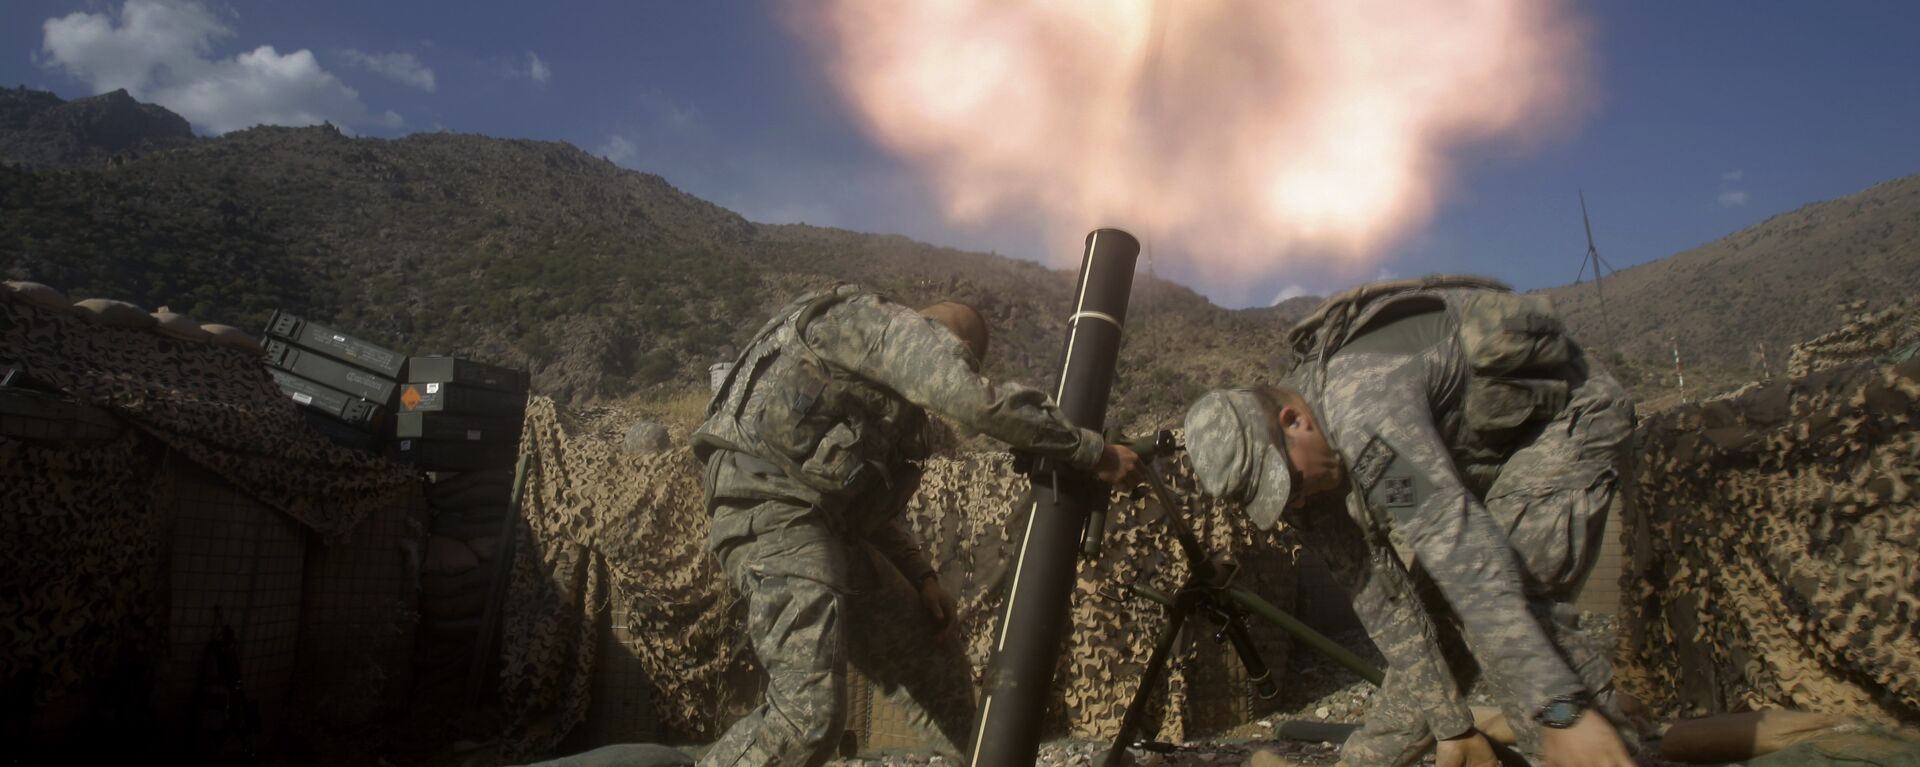 US soldiers from the 2nd Battalion, 12th Infantry Regiment, 4th Brigade Combat Team, fire mortars at known enemy firing positions from a base in the Pech River Valley in Afghanistan's Kunar province, Saturday, Oct. 24, 2009.  - Sputnik International, 1920, 17.08.2021